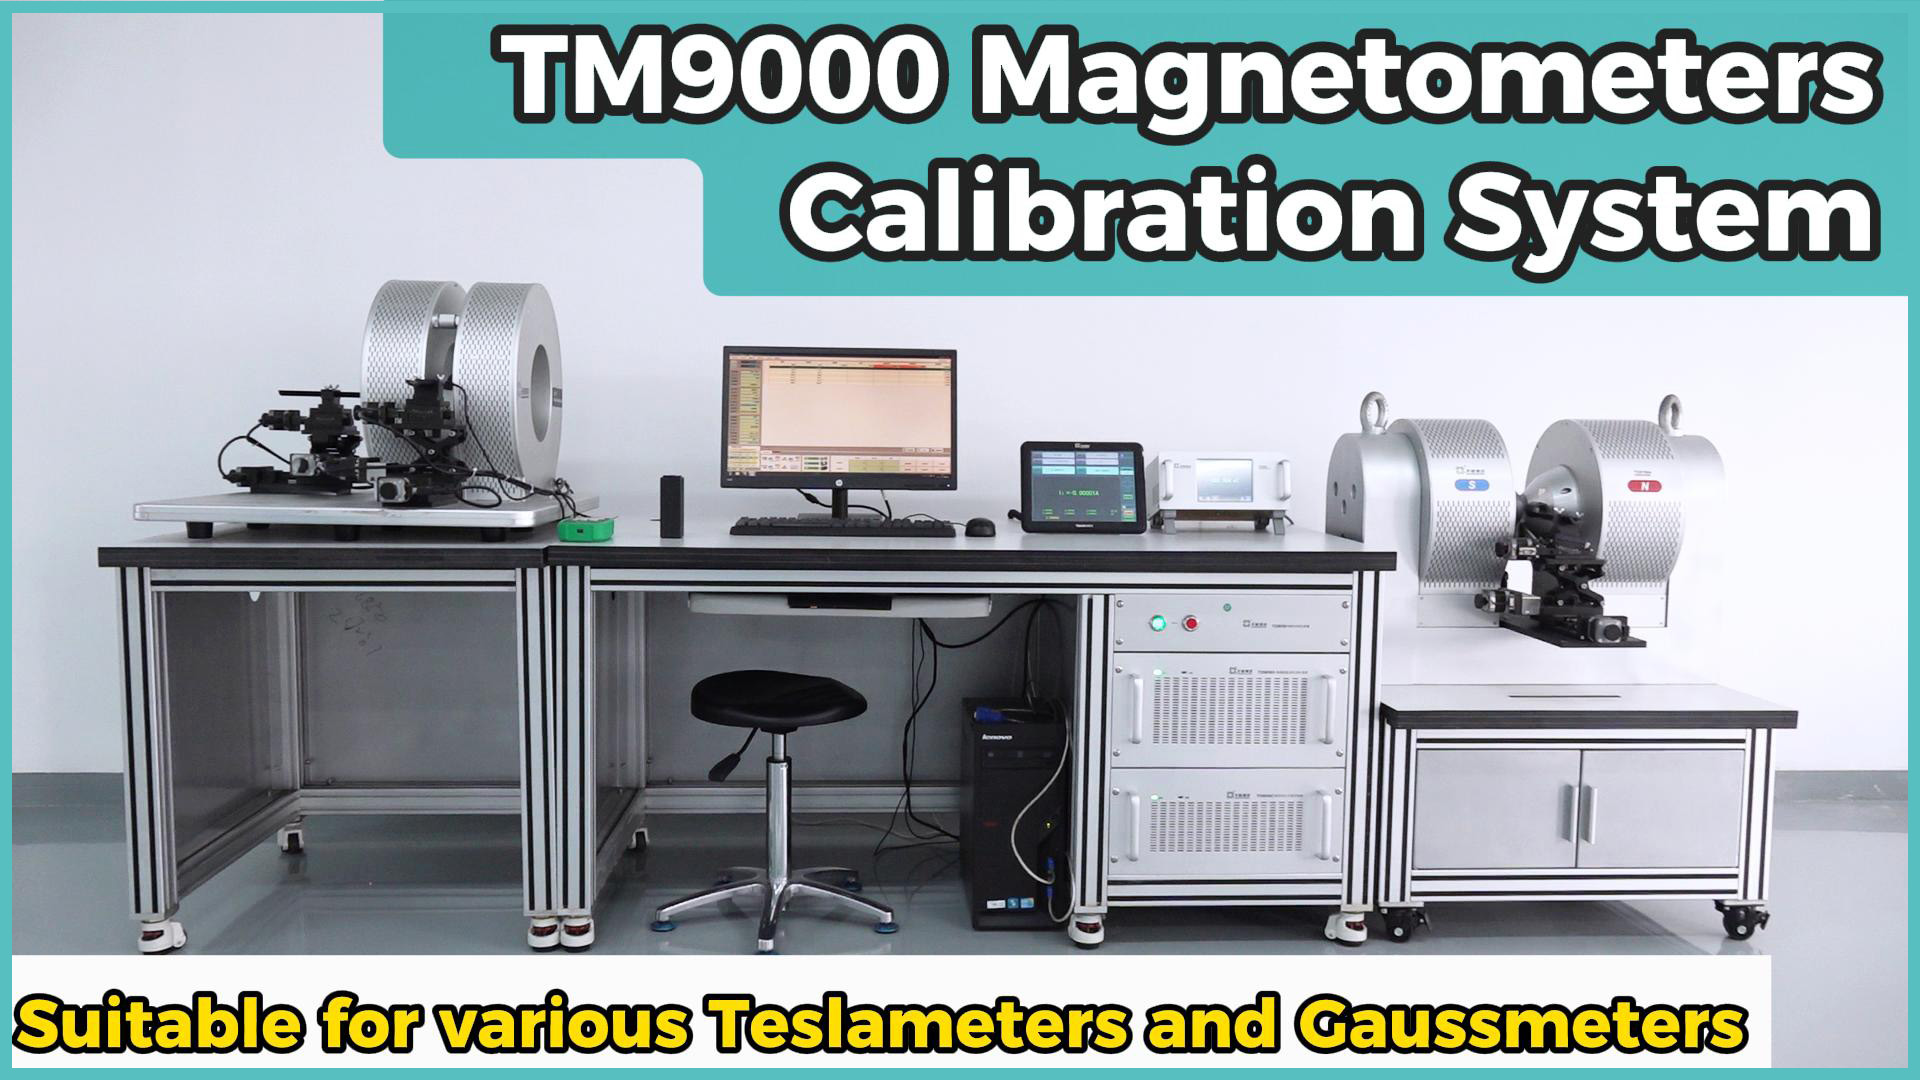 TM9000-How to Calibrate a Magnetometer